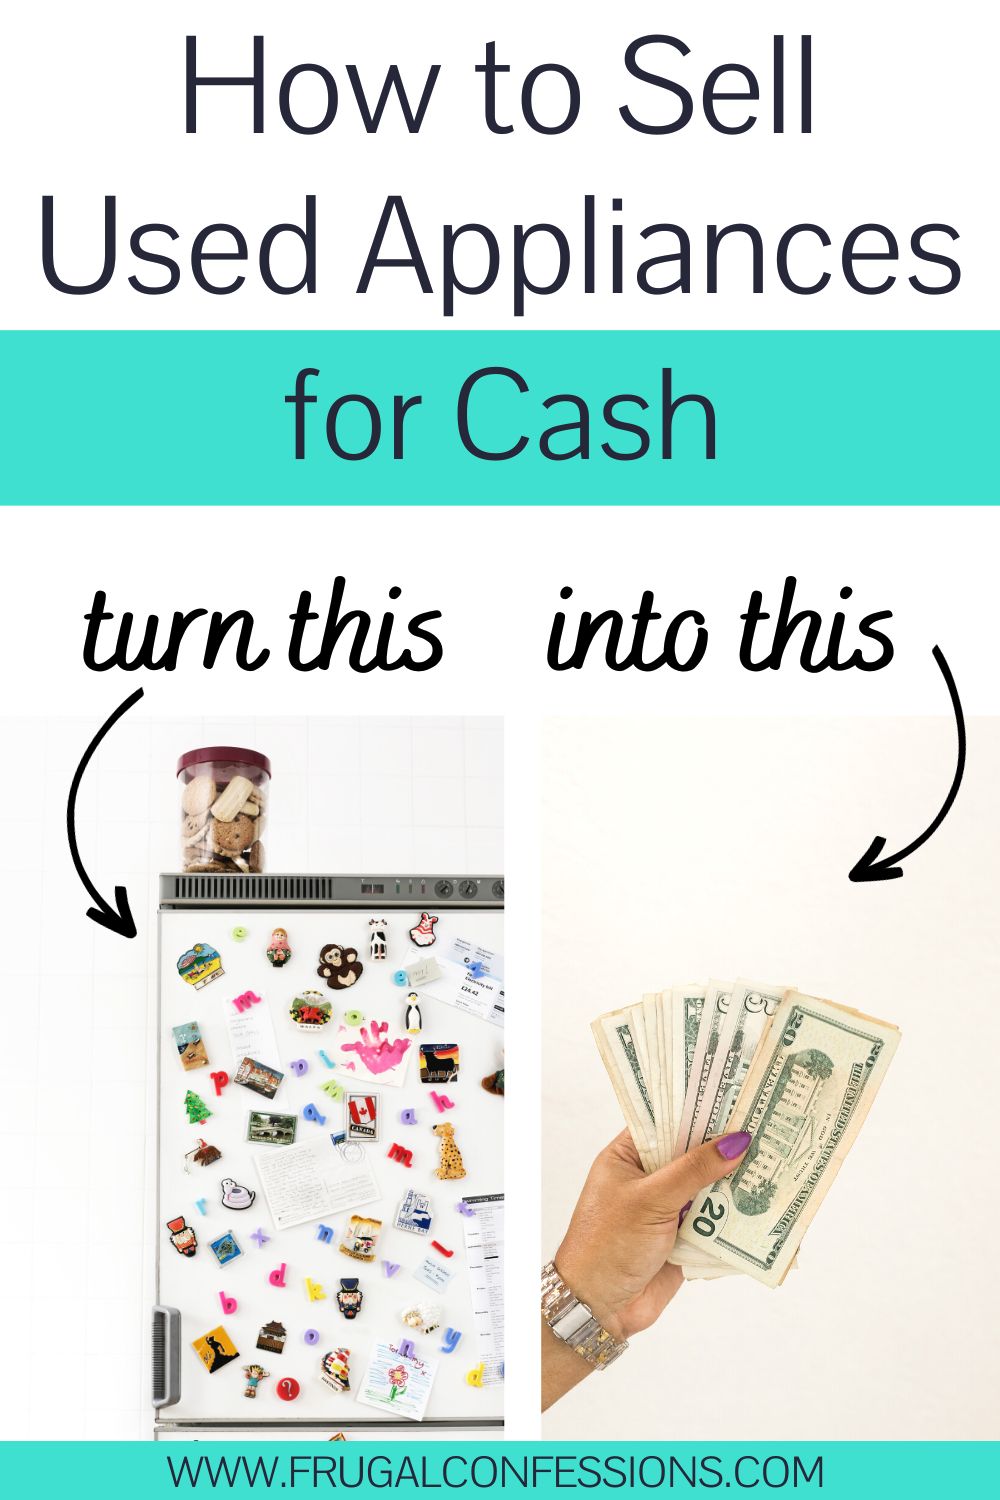 old refrigerator with lots of magnets next to cash, text overlay 